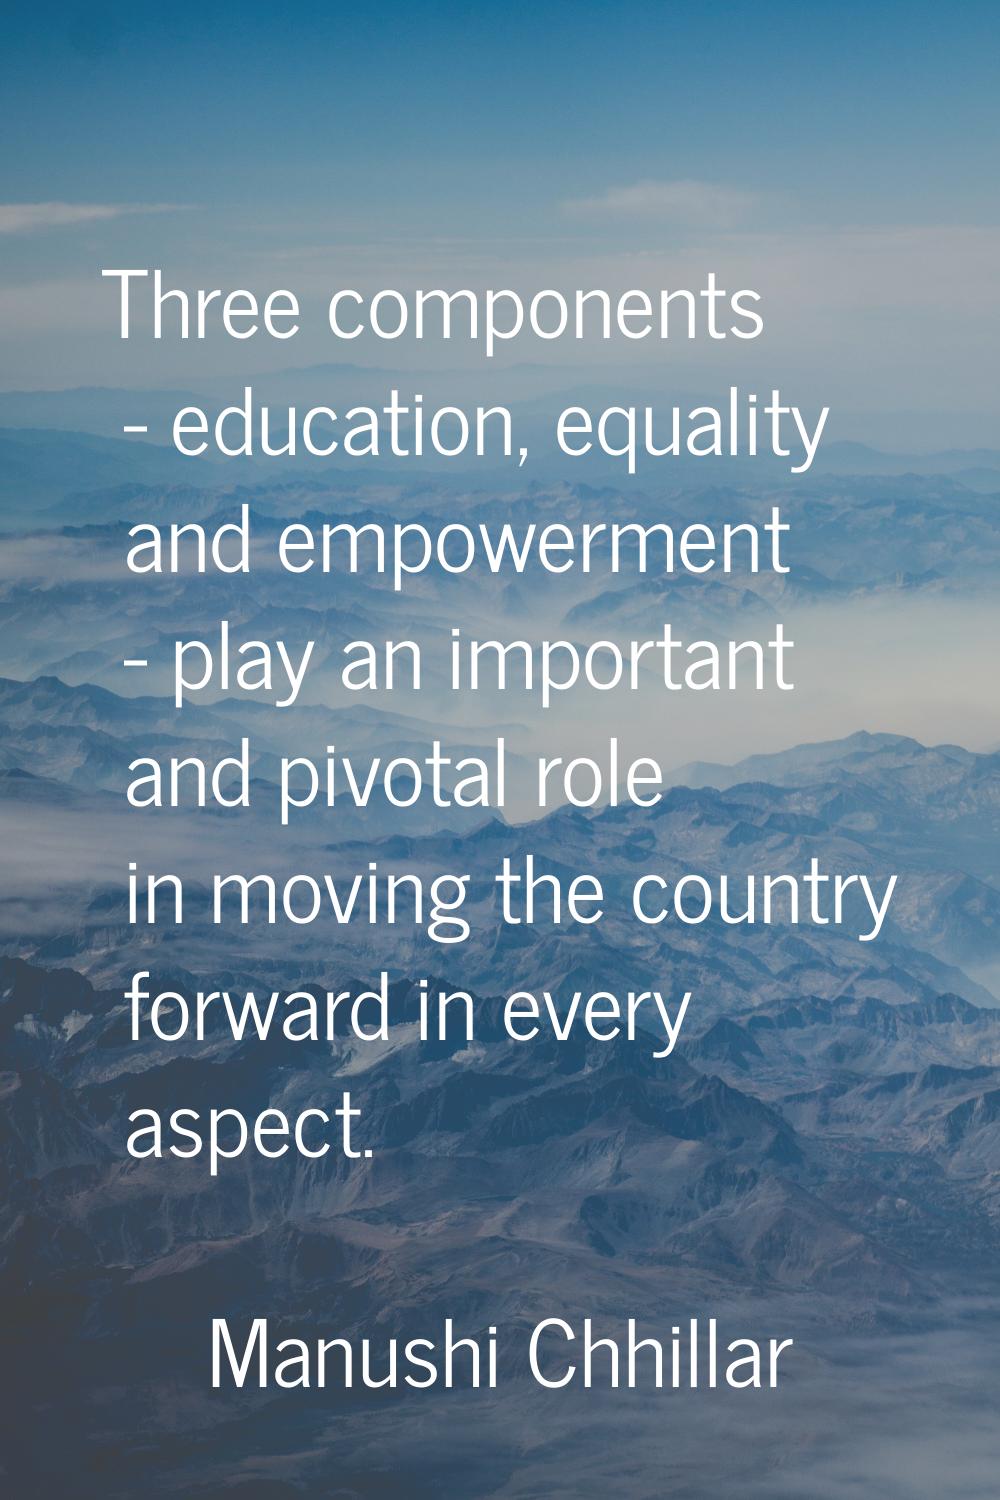 Three components - education, equality and empowerment - play an important and pivotal role in movi